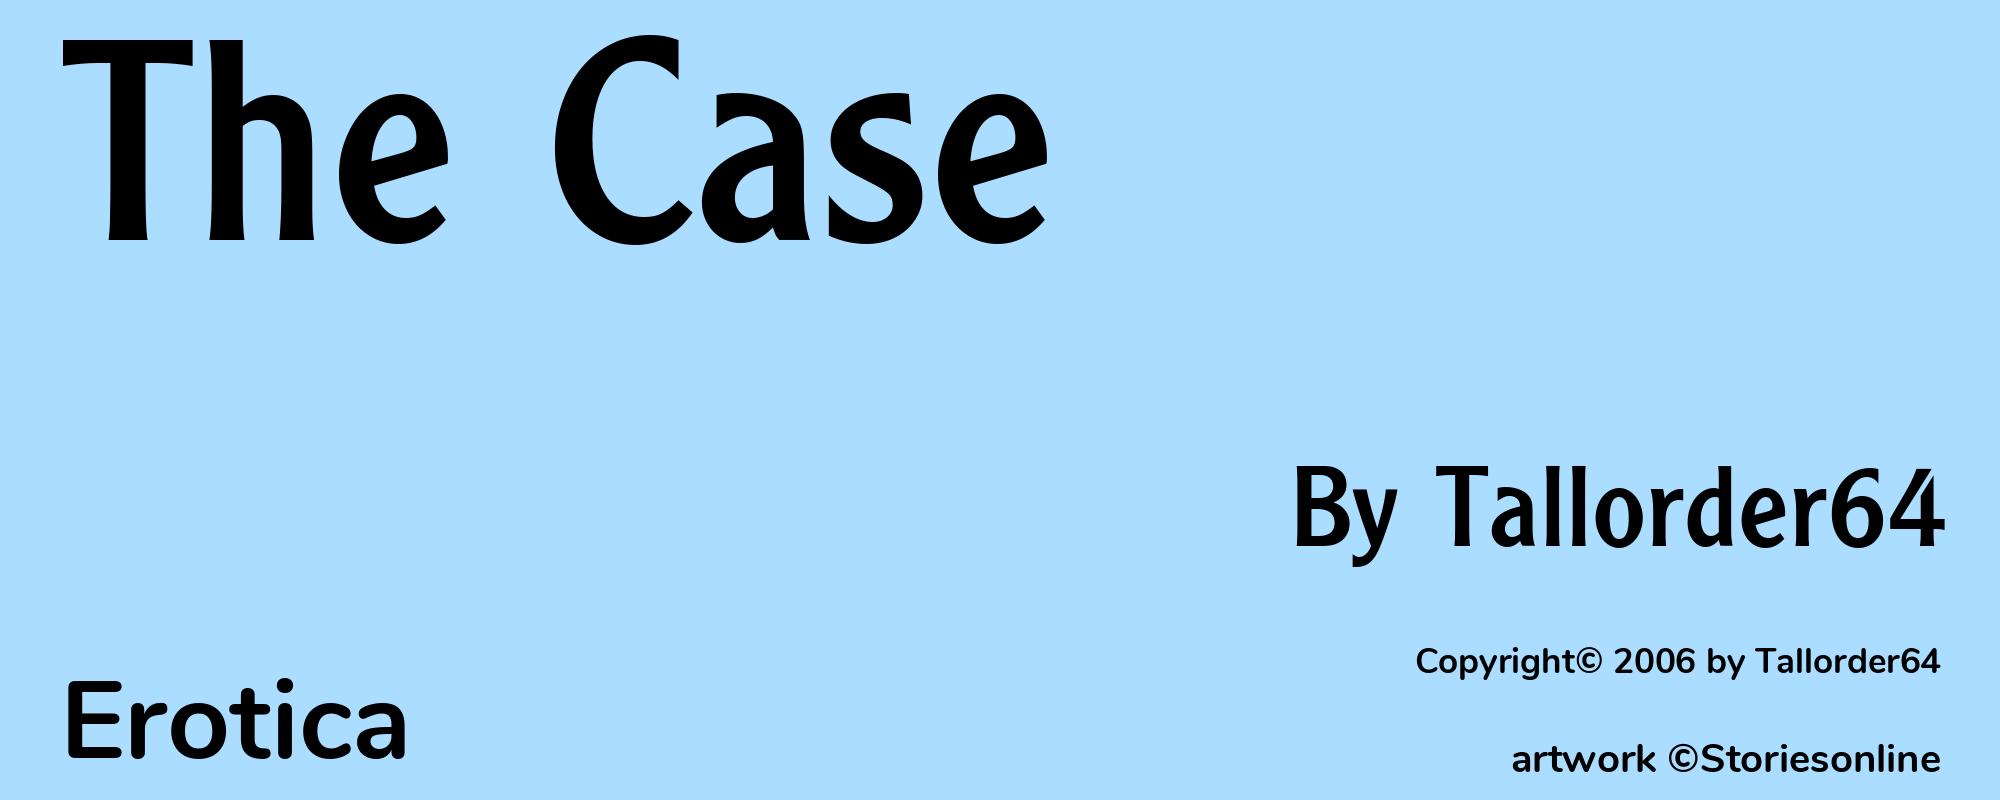 The Case - Cover